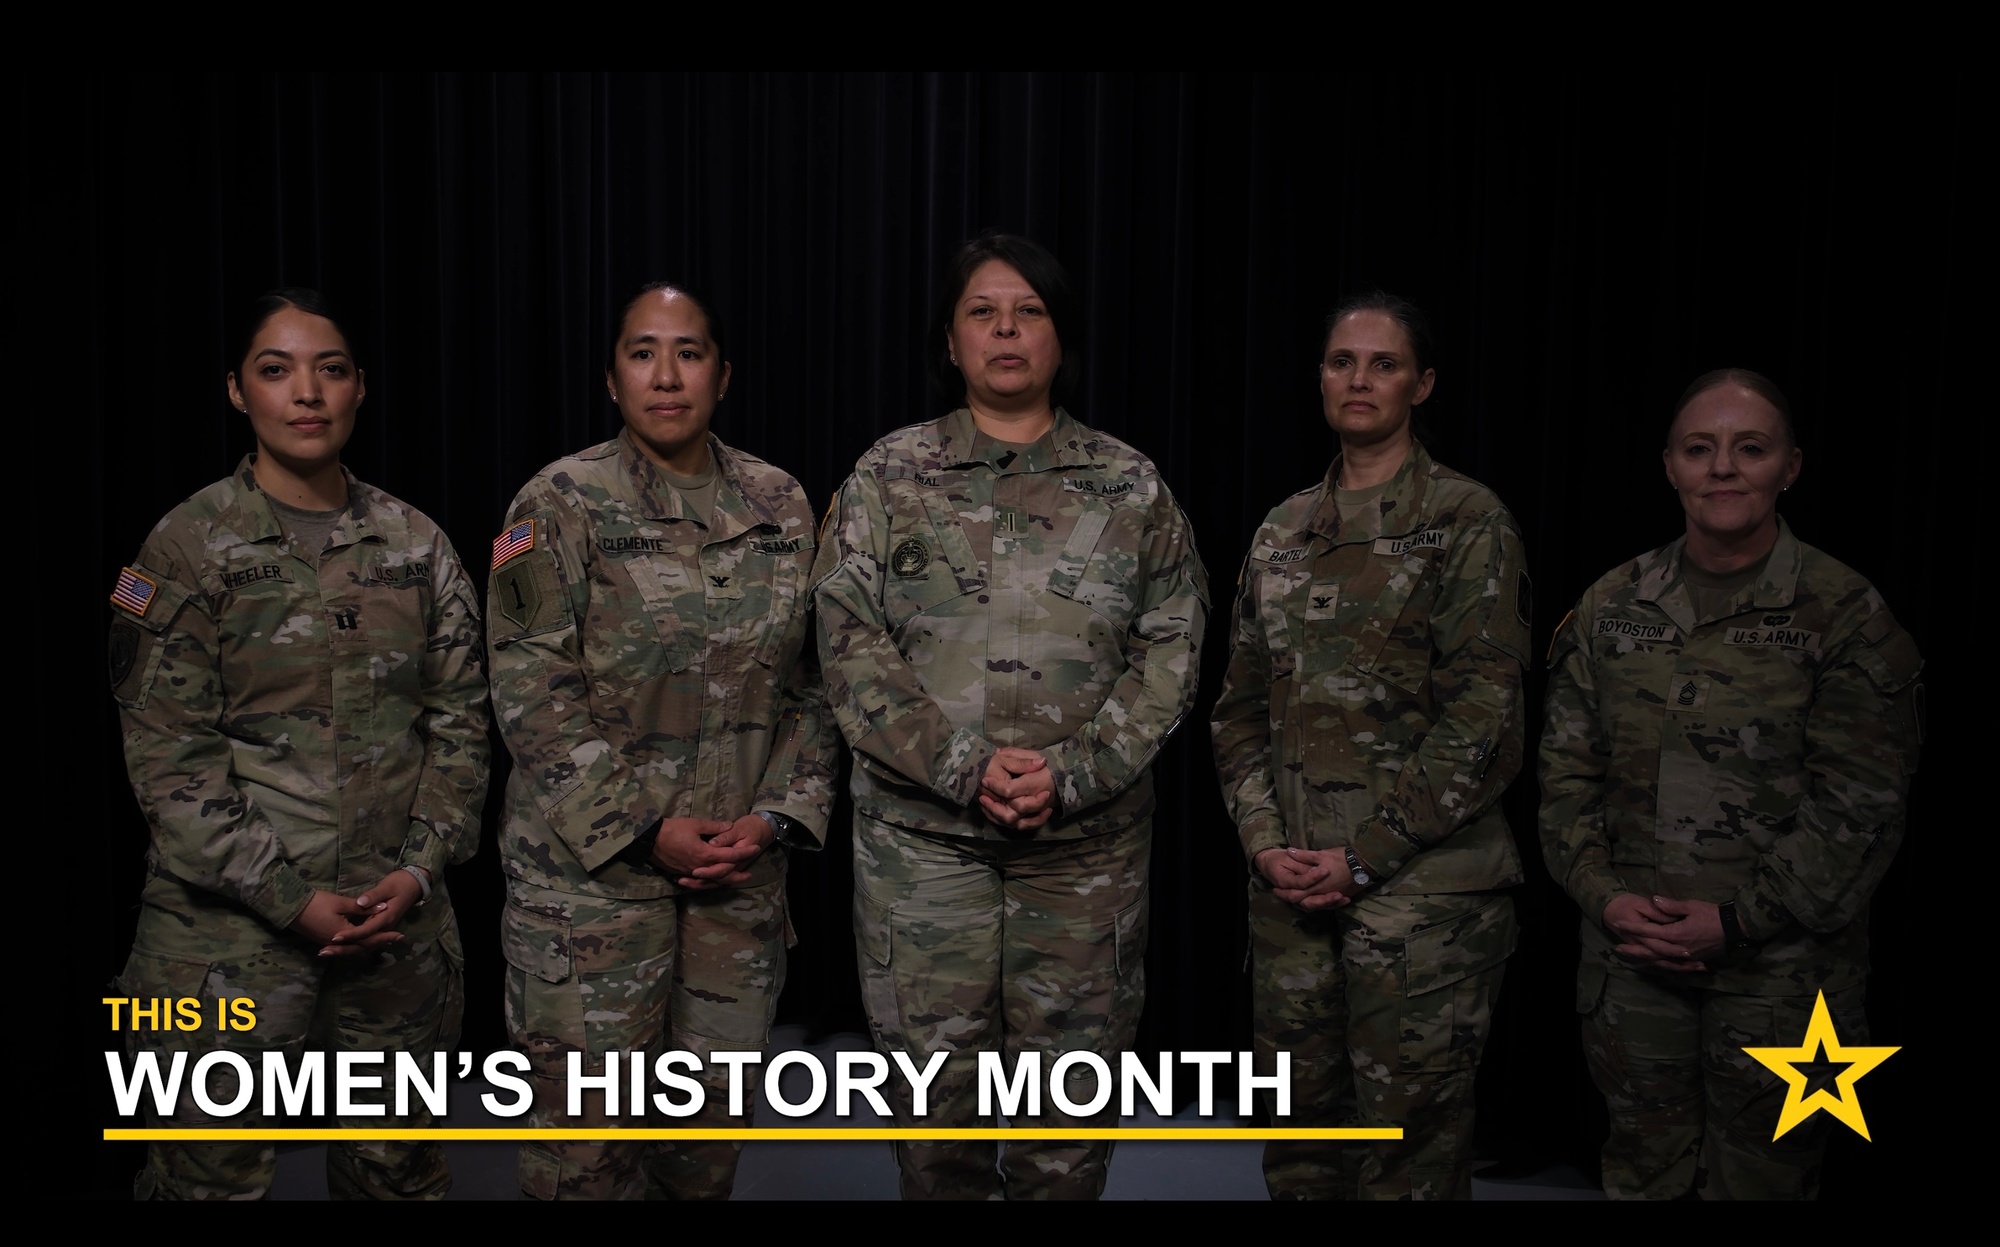 U.S. Army leaders with 10th Army Air and Missile Defense Command explain the history behind women’s history month Mar. 18 in Sembach, Germany. U.S. Army Chief Warrant Officer 5 Araceli Rial, Col. Lisa Bartel, Col. Rosanna Clemente, Capt. Abigail Wheeler, Master Sgt. Marscha Boydston, and Sgt. Yesenia Cadavid explains the importance of Women’s History Month to honor and celebrate the contributions of women 